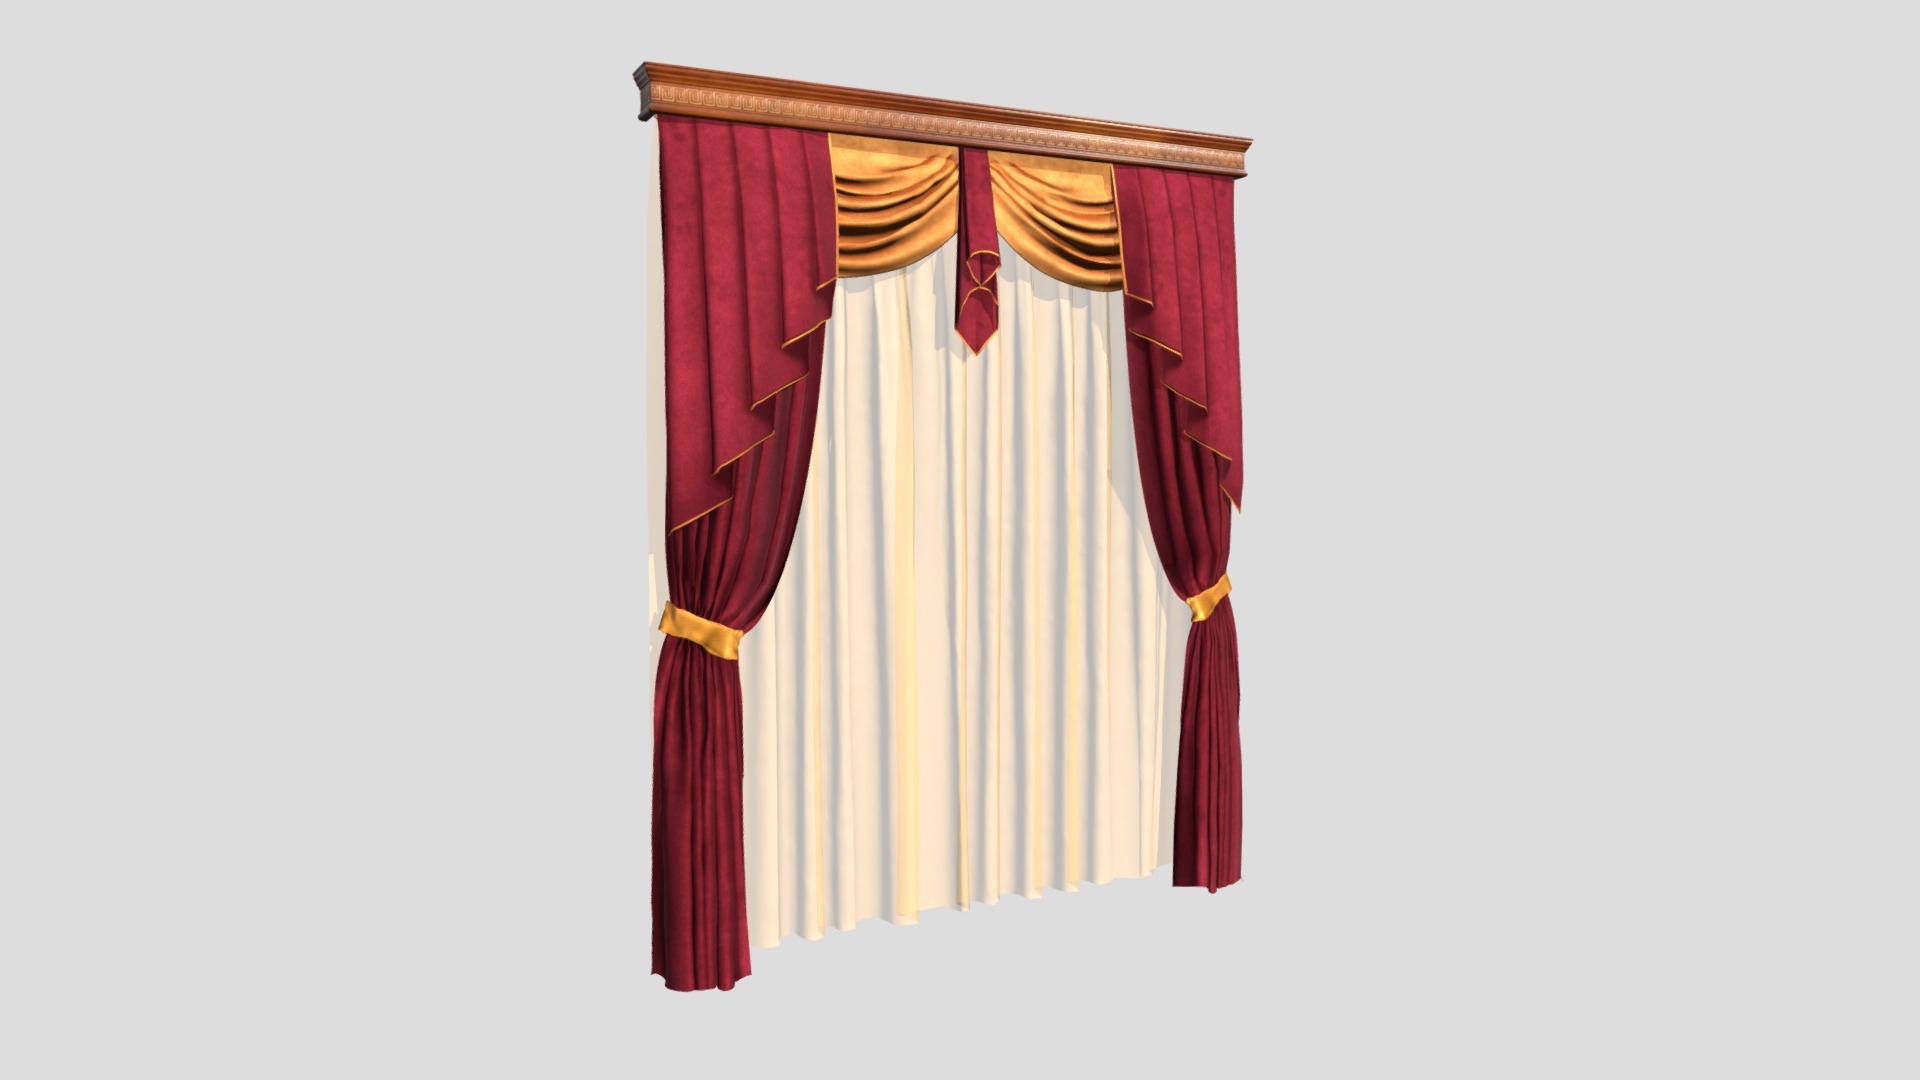 3D model №602 Curtain  3D low poly model for VR-projects - This is a 3D model of the №602 Curtain  3D low poly model for VR-projects. The 3D model is about shape, arrow.